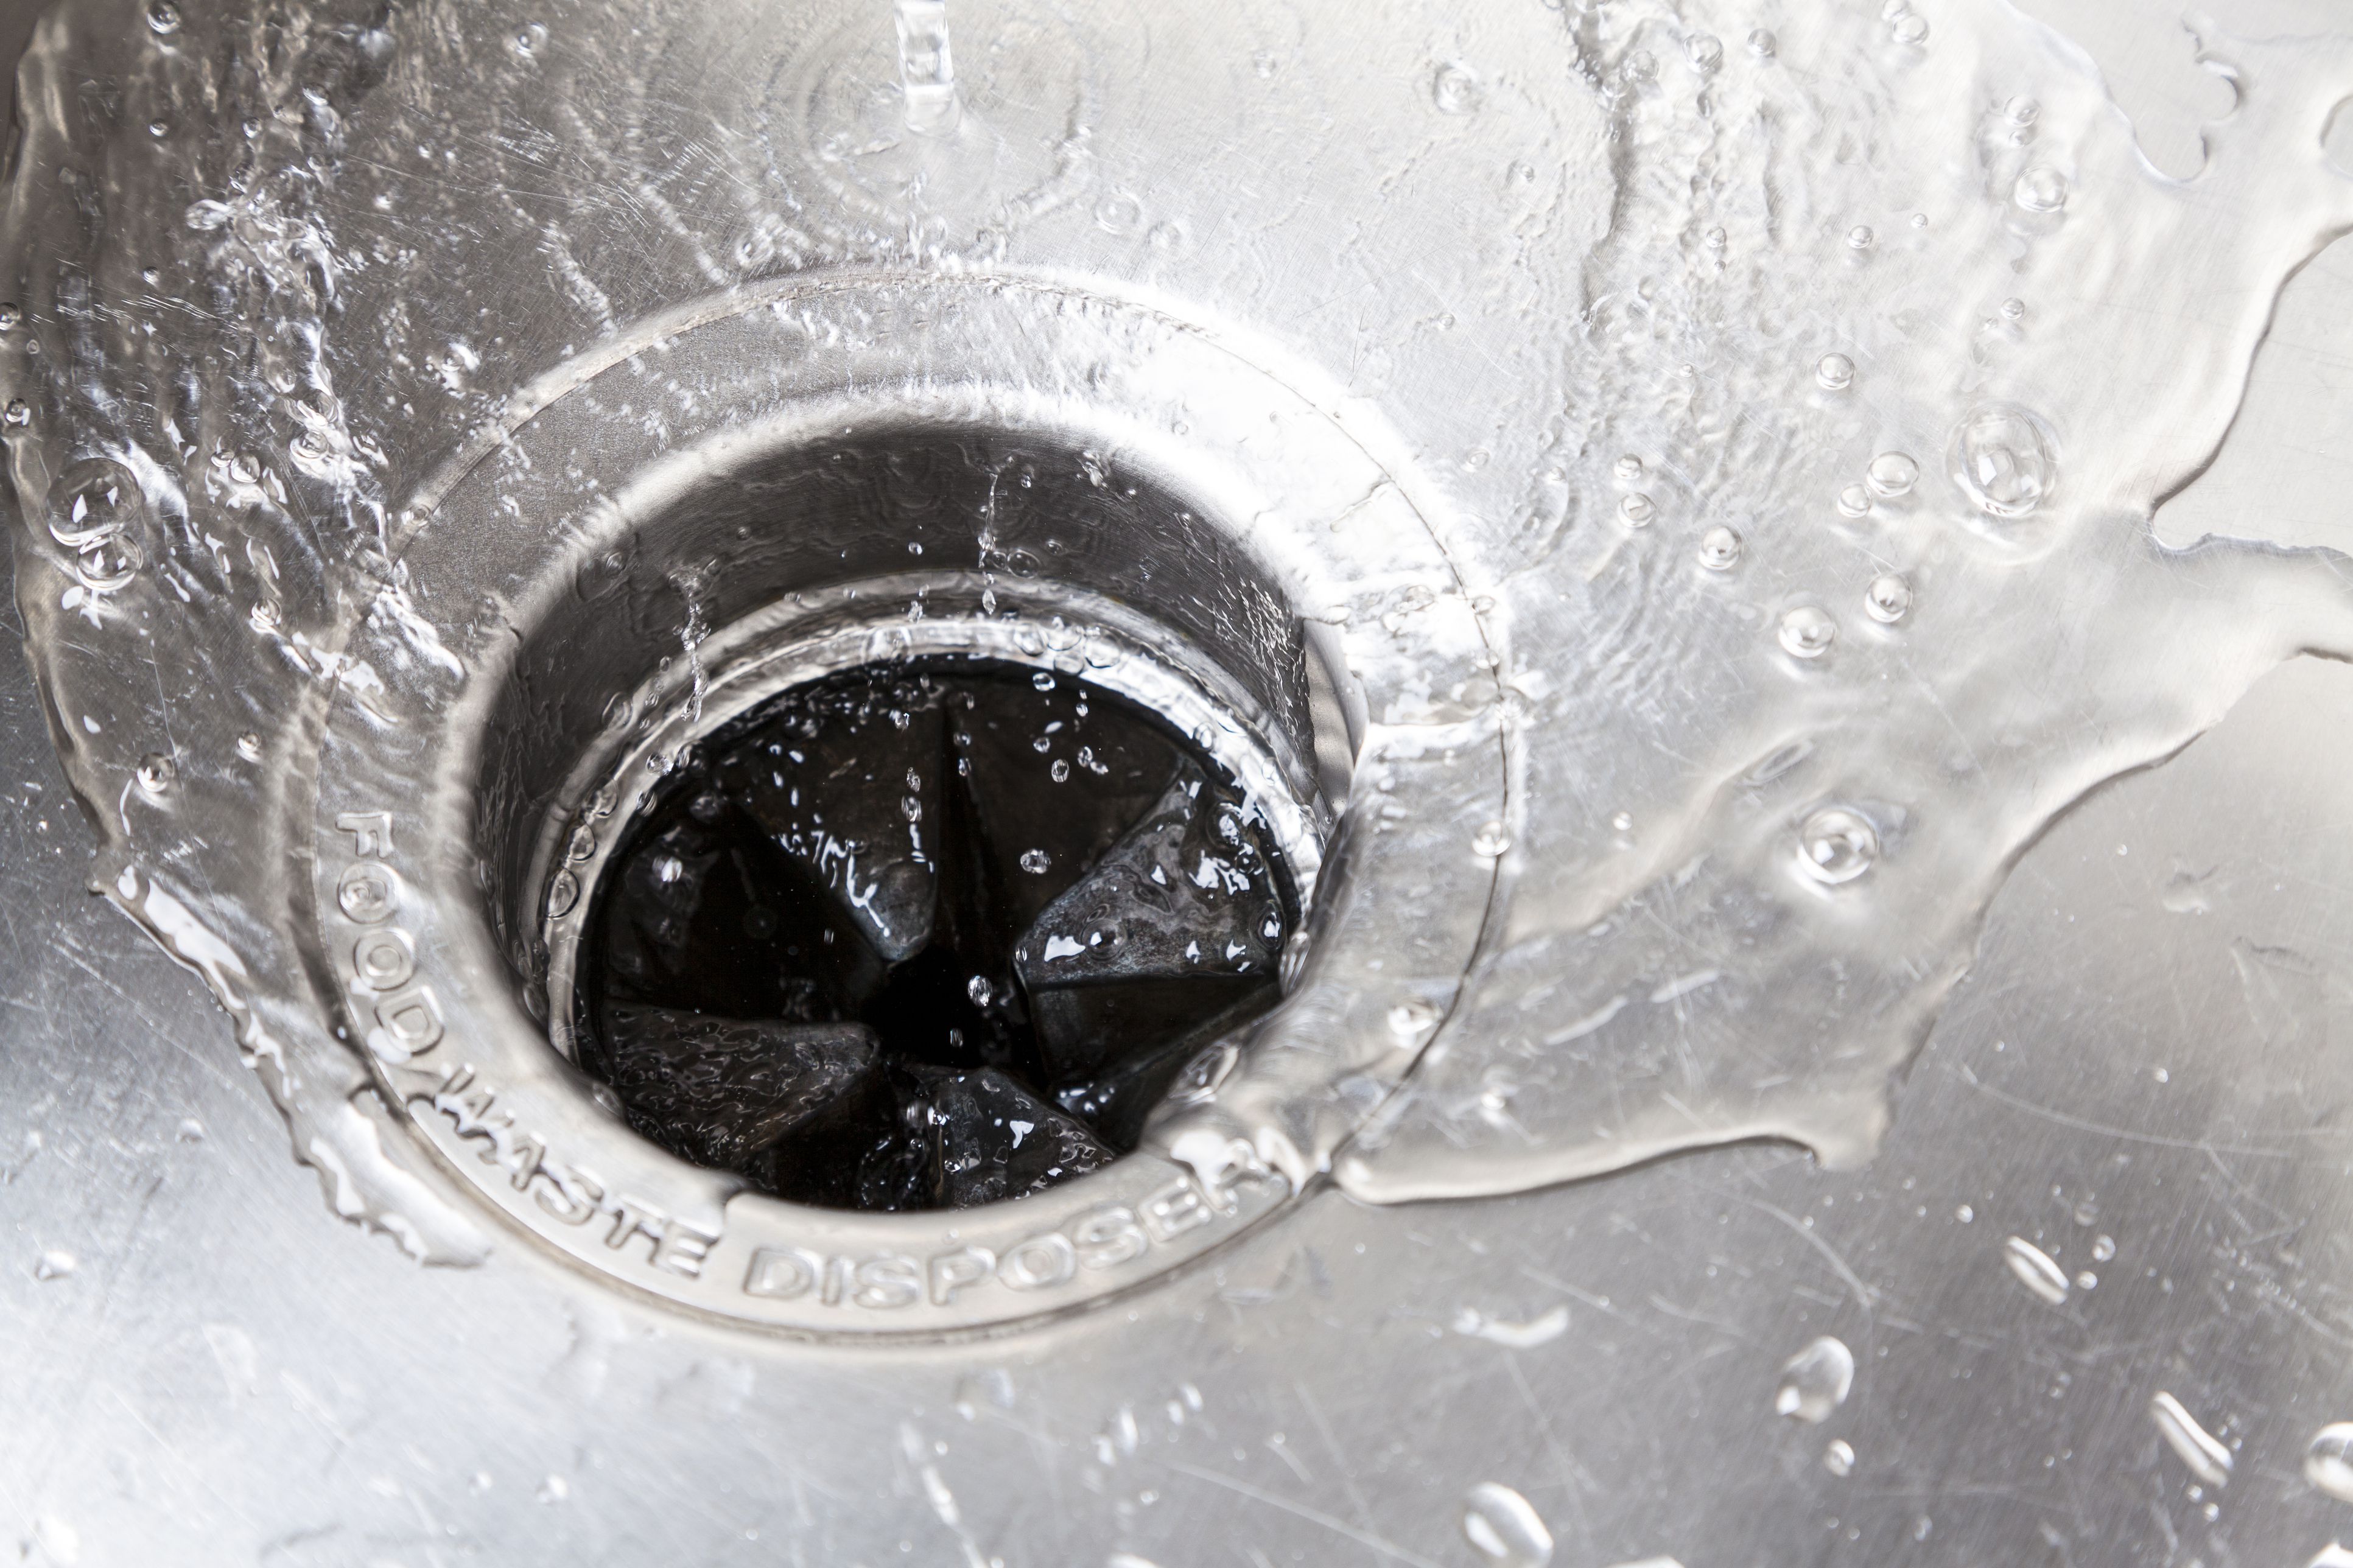 water building up in kitchen sink with garbage disposal